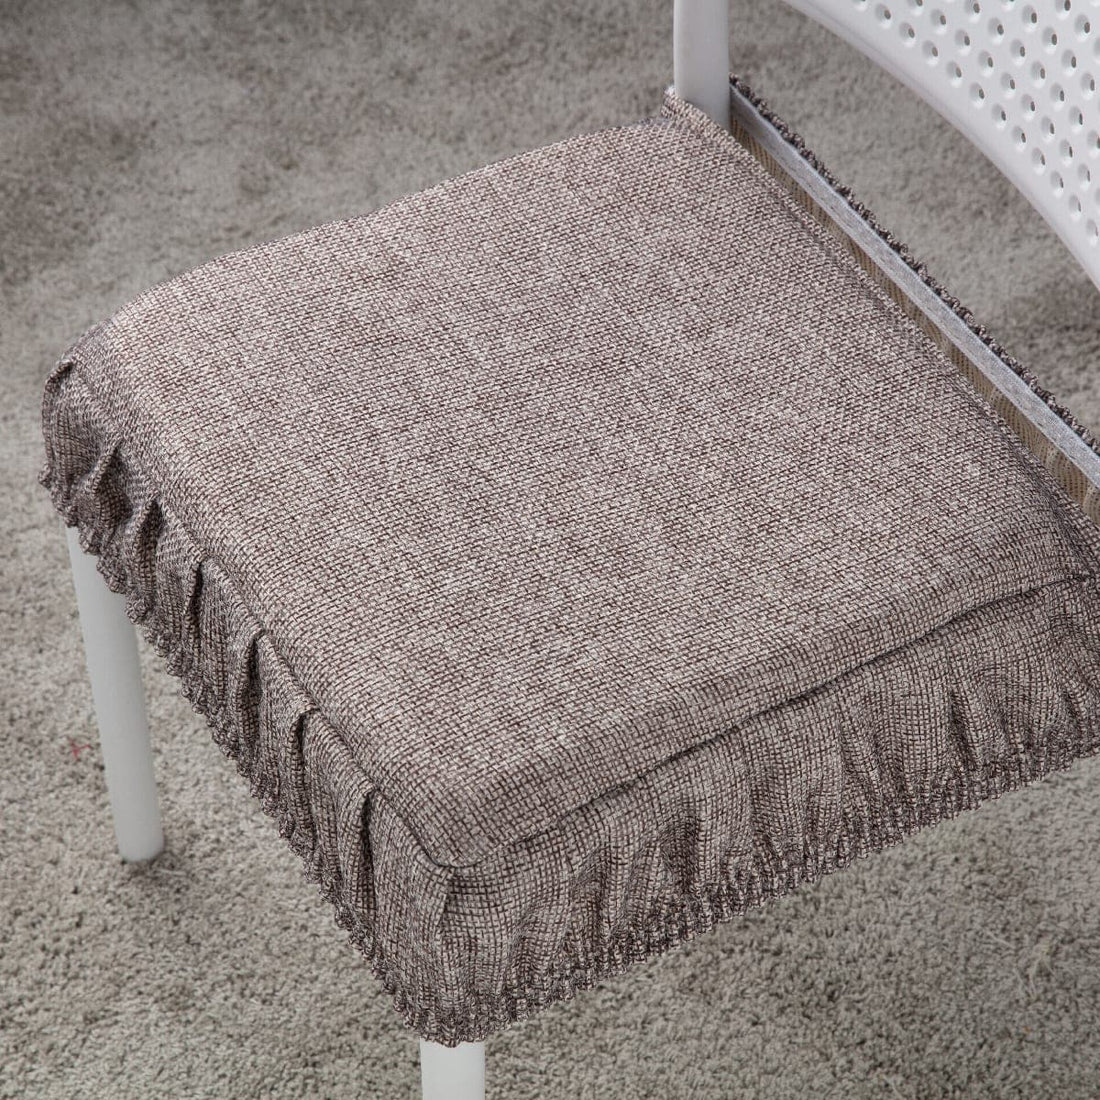 ANTONELLA 42X42 CM CHAIR COVER WITH ELASTIC BAND GREY - best price from Maltashopper.com BR480006608